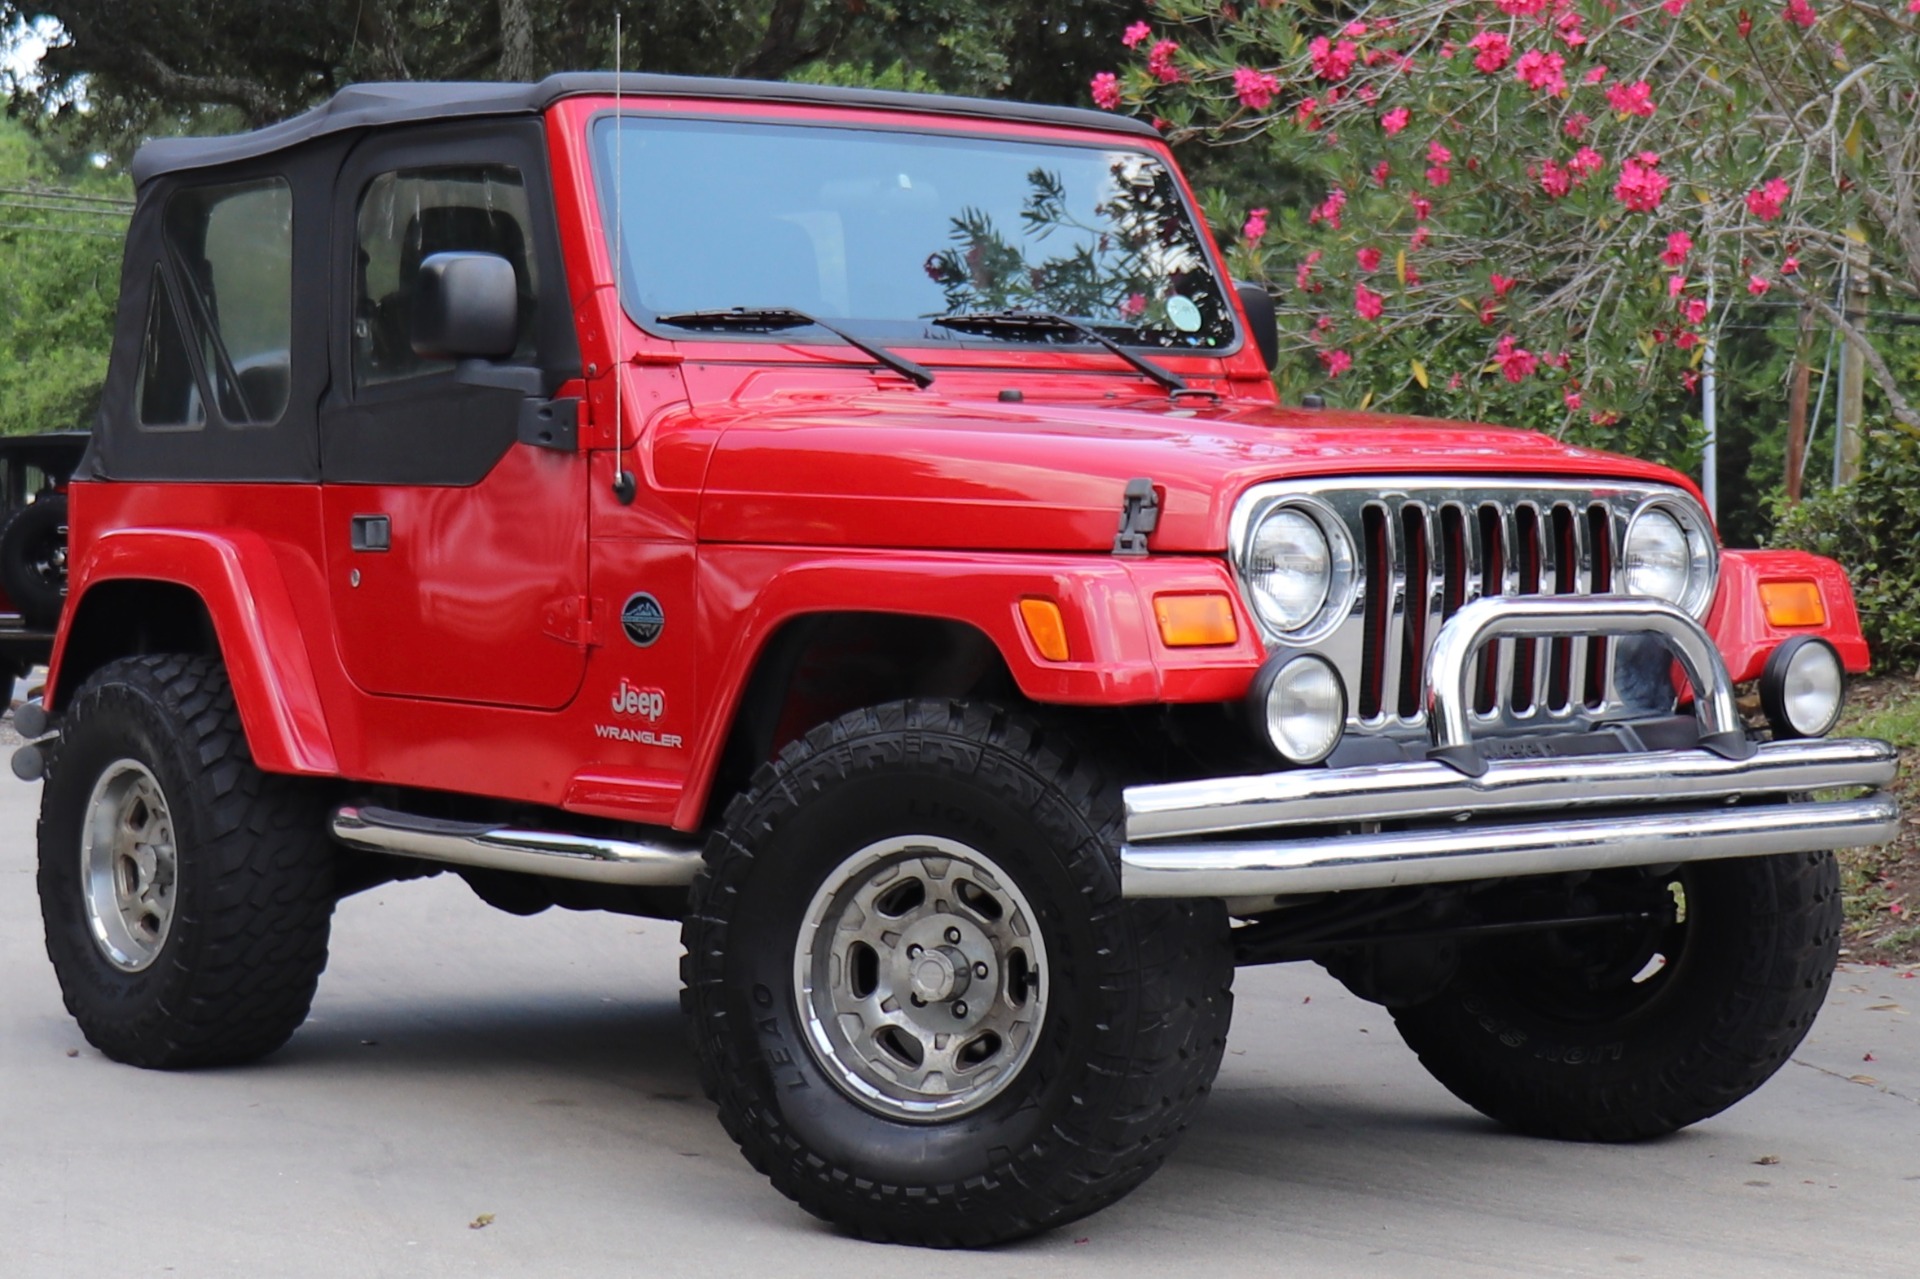 Used 2005 Jeep Wrangler Rocky Mountain Edition For Sale ($18,995) | Select  Jeeps Inc. Stock #387993